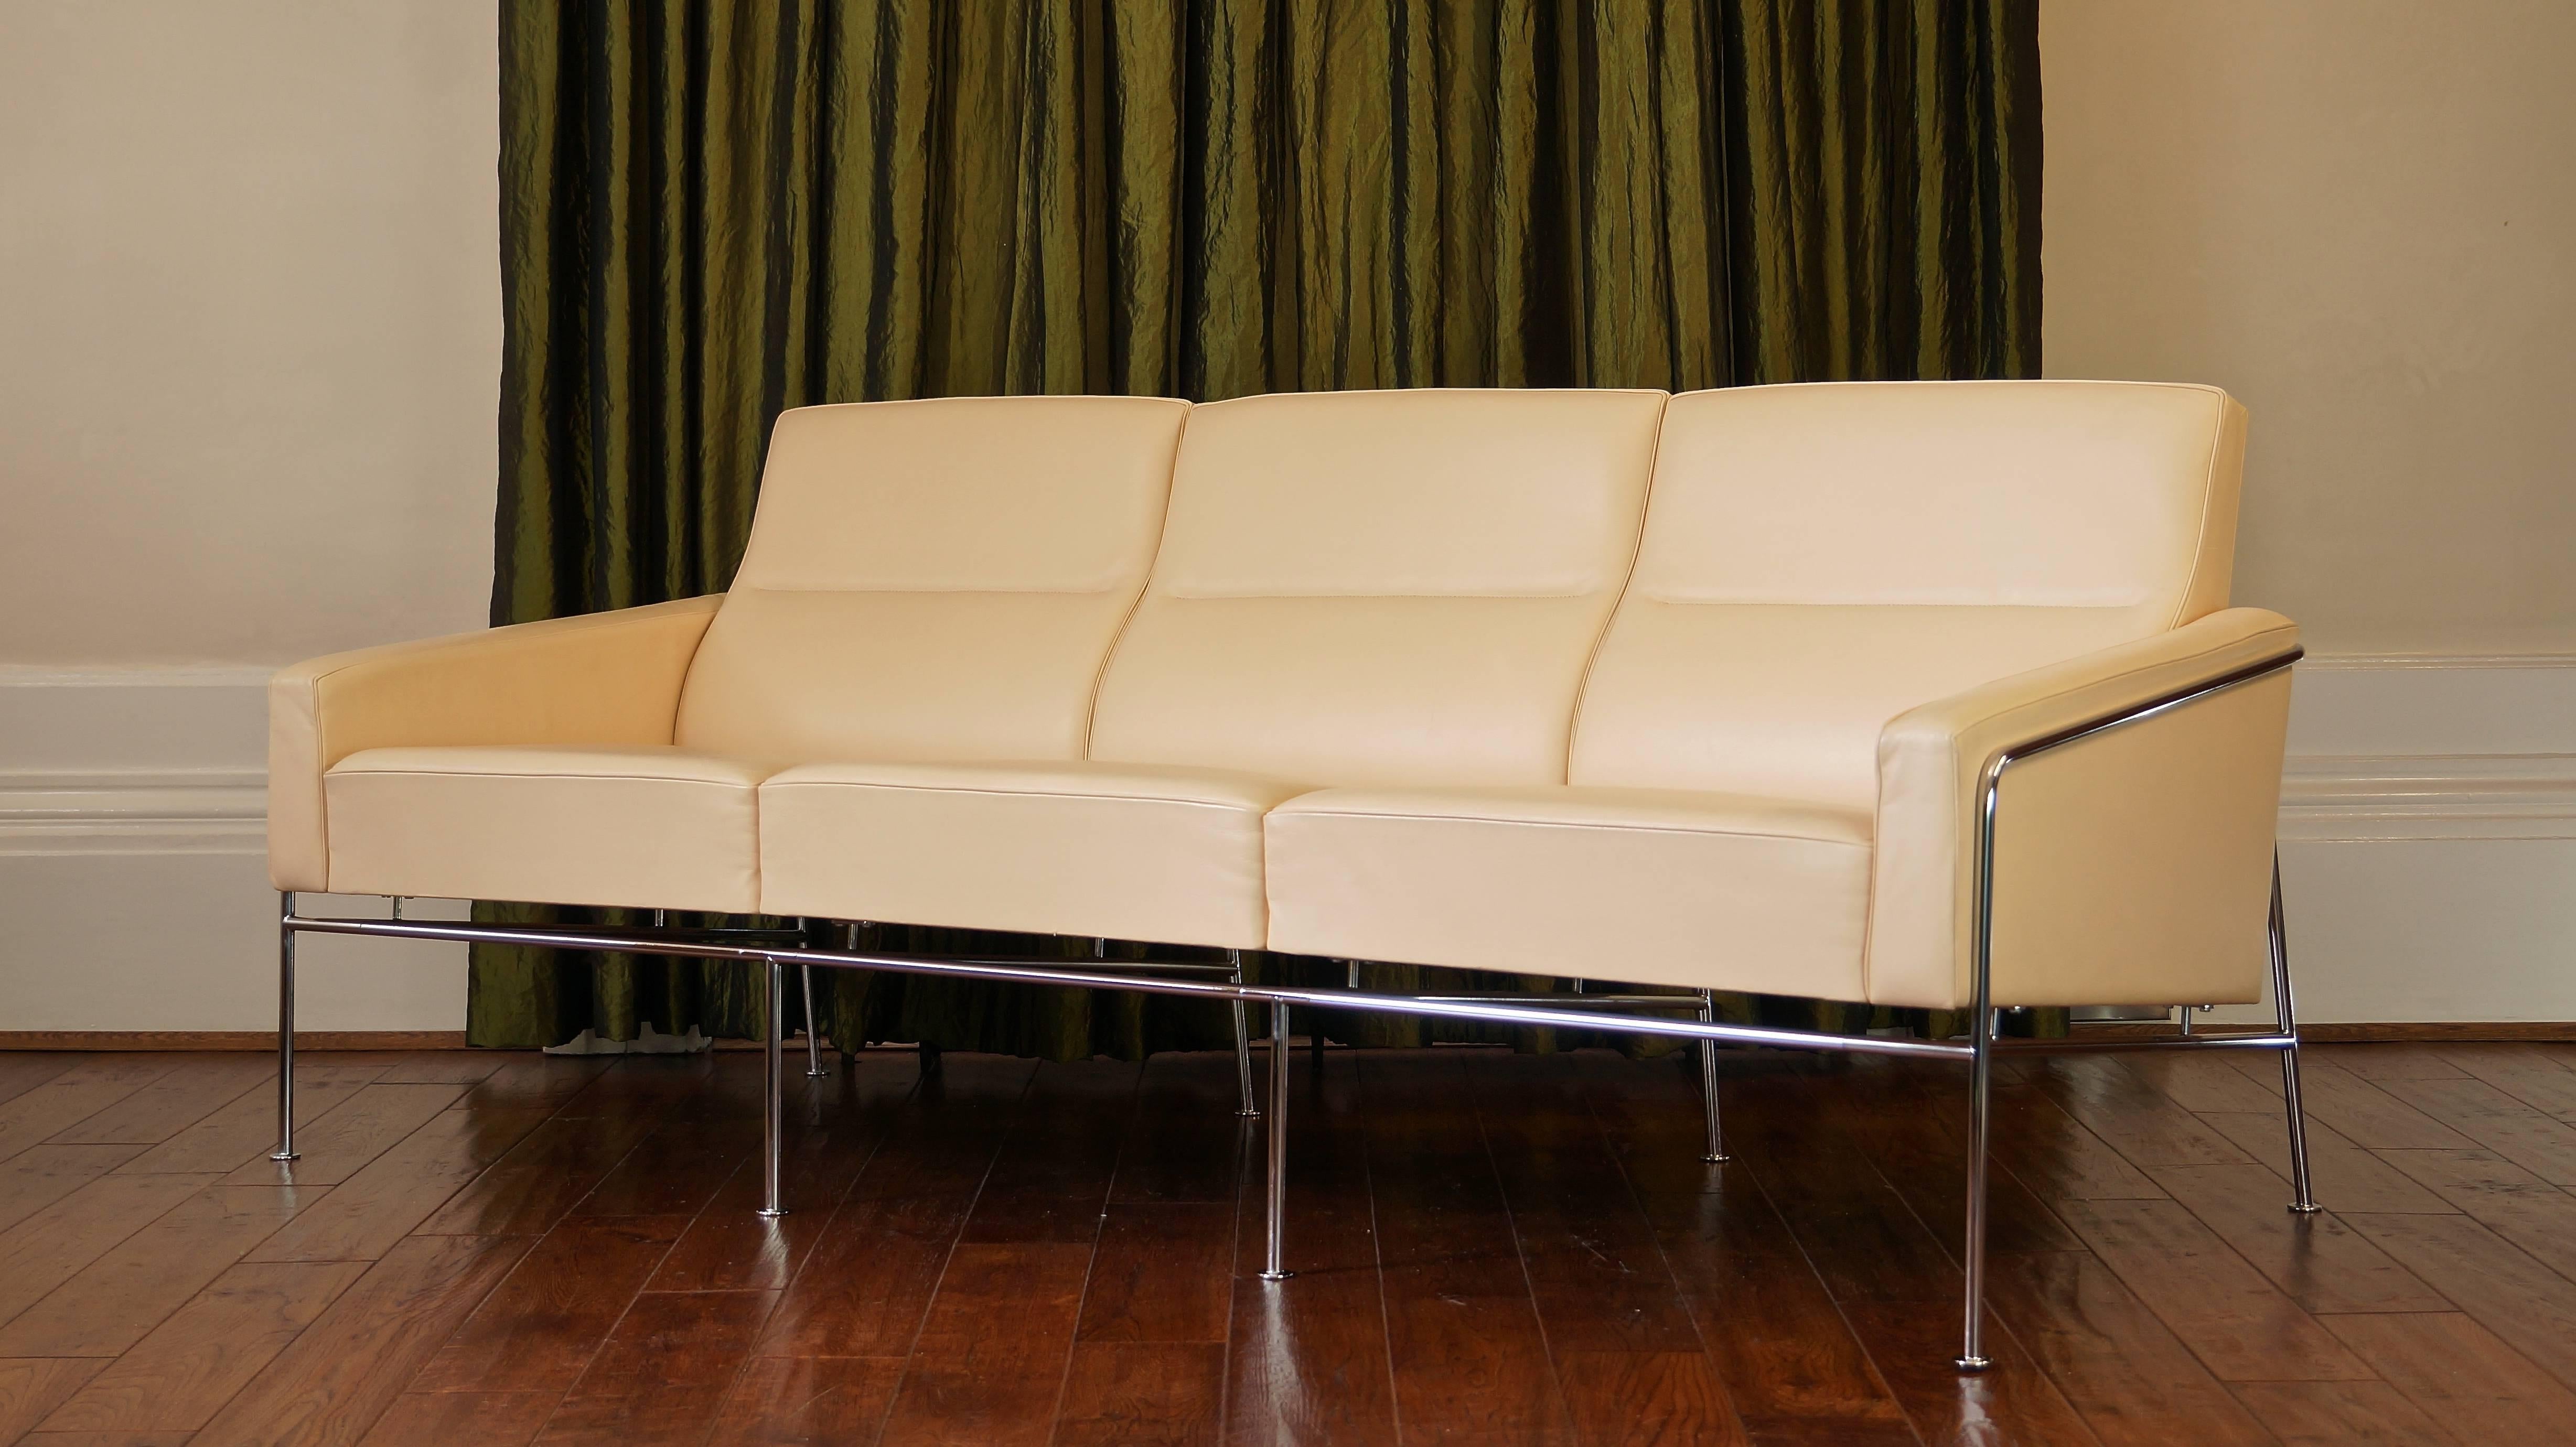 Arne Jacobsen series 3303 sofa in premium cream leather. 

This classic sofa offers both a clean, modern look and incredibly comfortable seating. The leather is in excellent condition with only light signs of use.

We also have a number of matching